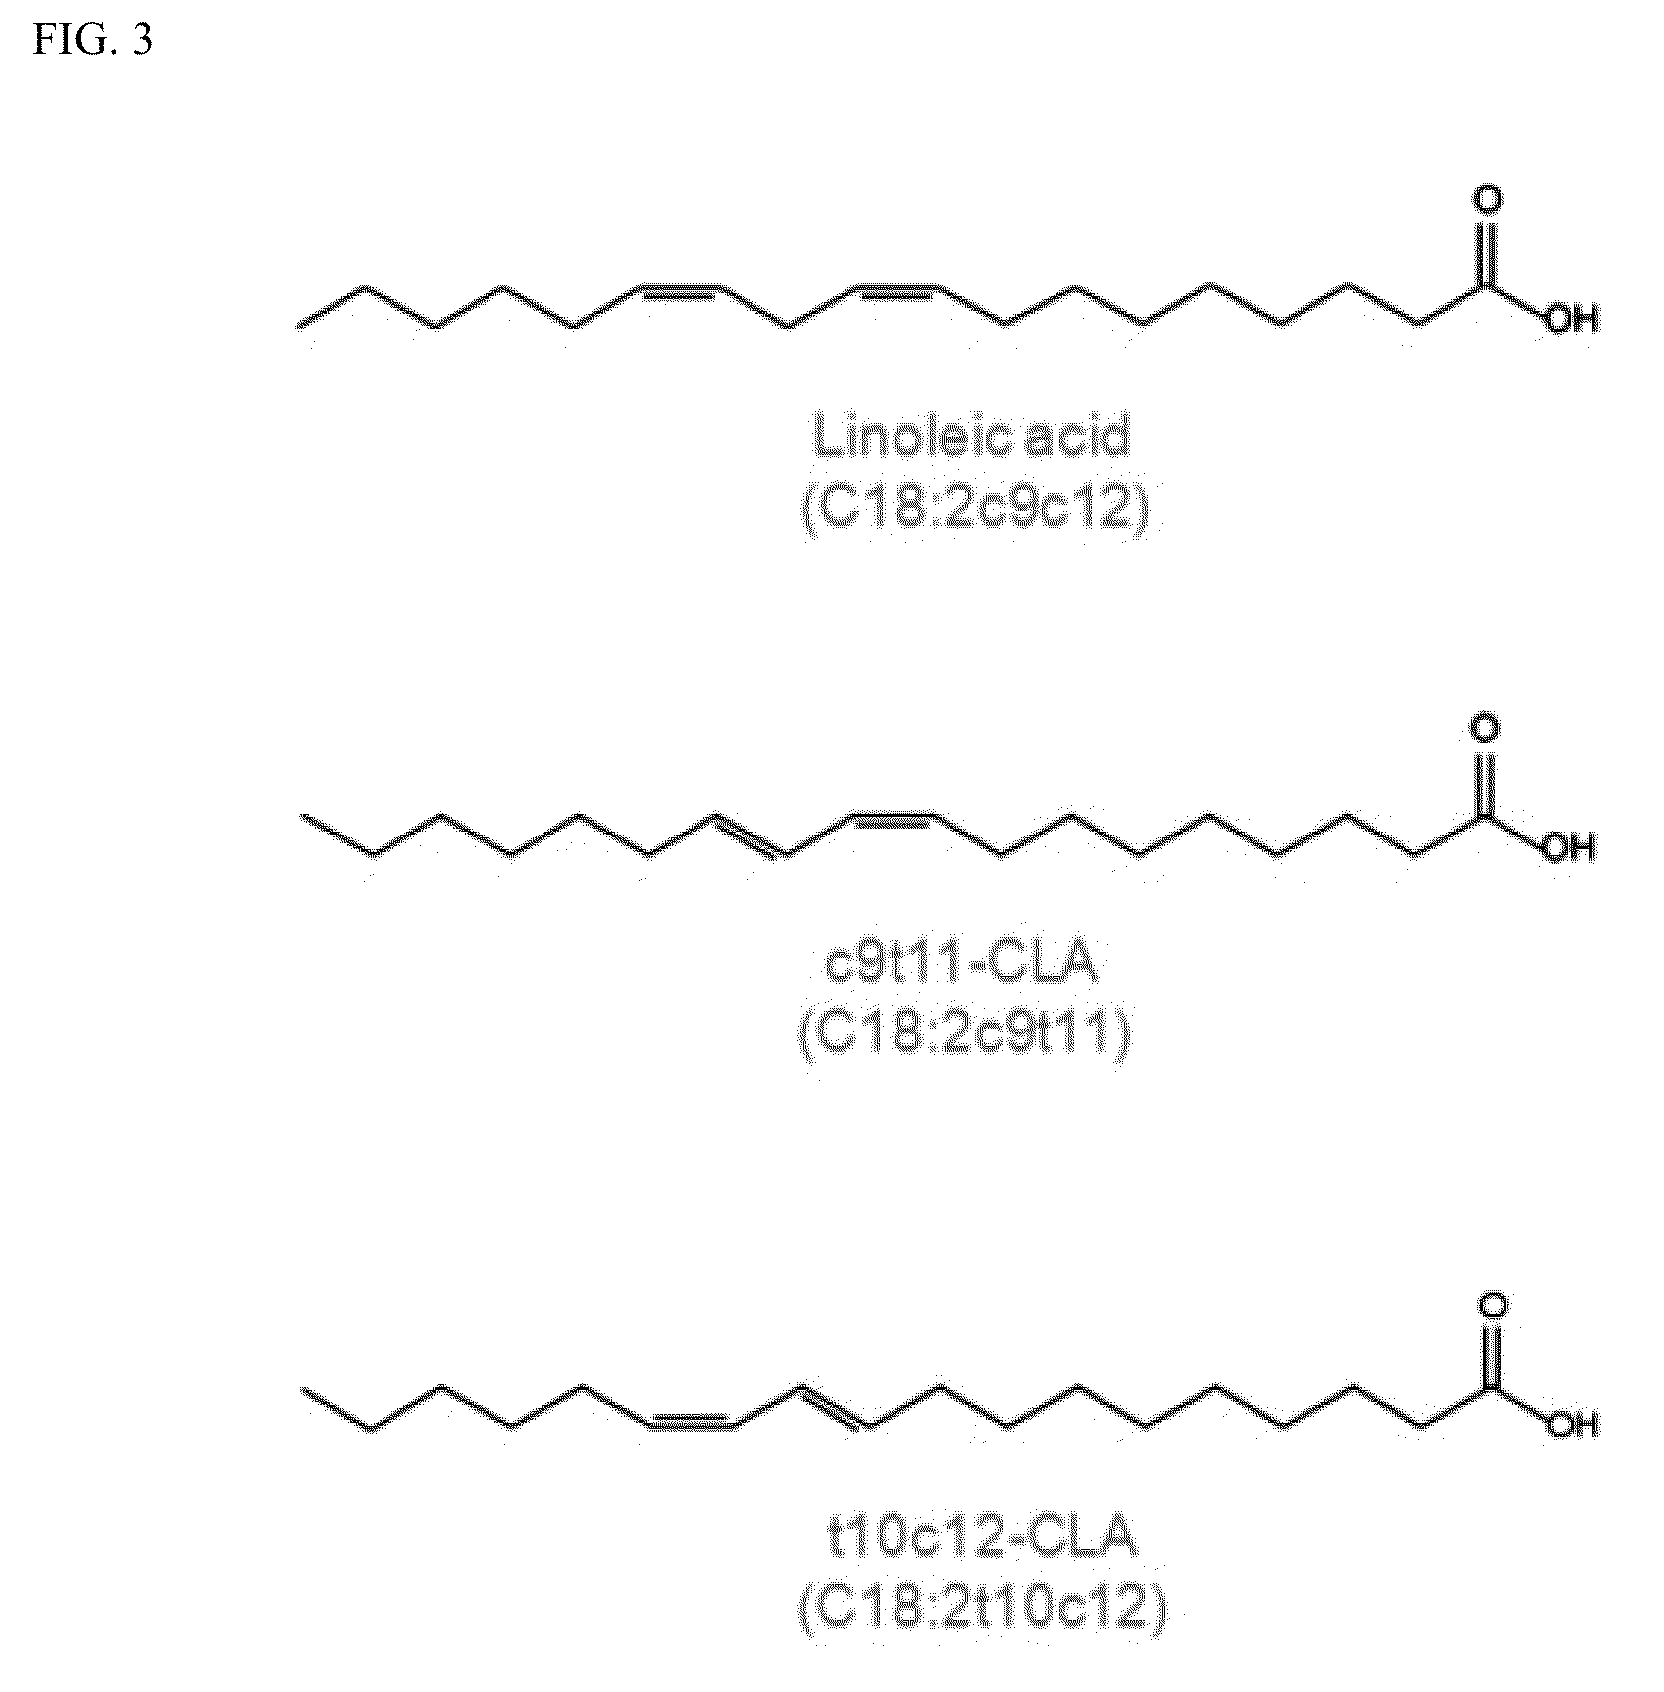 Progesterone-containing compositions and devices